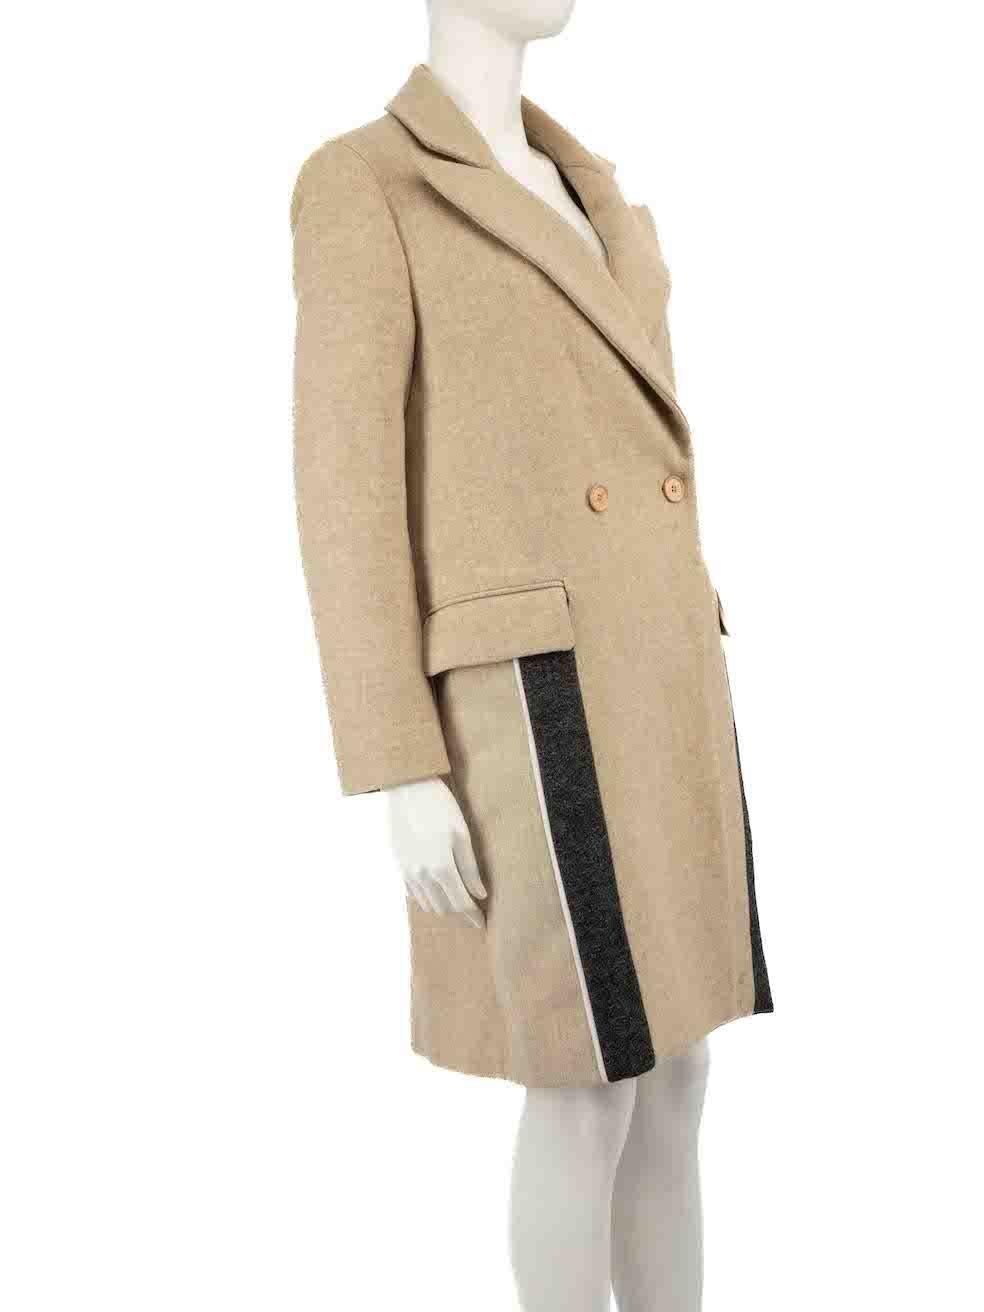 CONDITION is Good. Minor wear to coat is evident. Light wear to lining, with discolouration to the back neck, brand label and underarms, with some pulling to the underarm seams. There are also marks to the sleeve edges, front lapel and front hem.